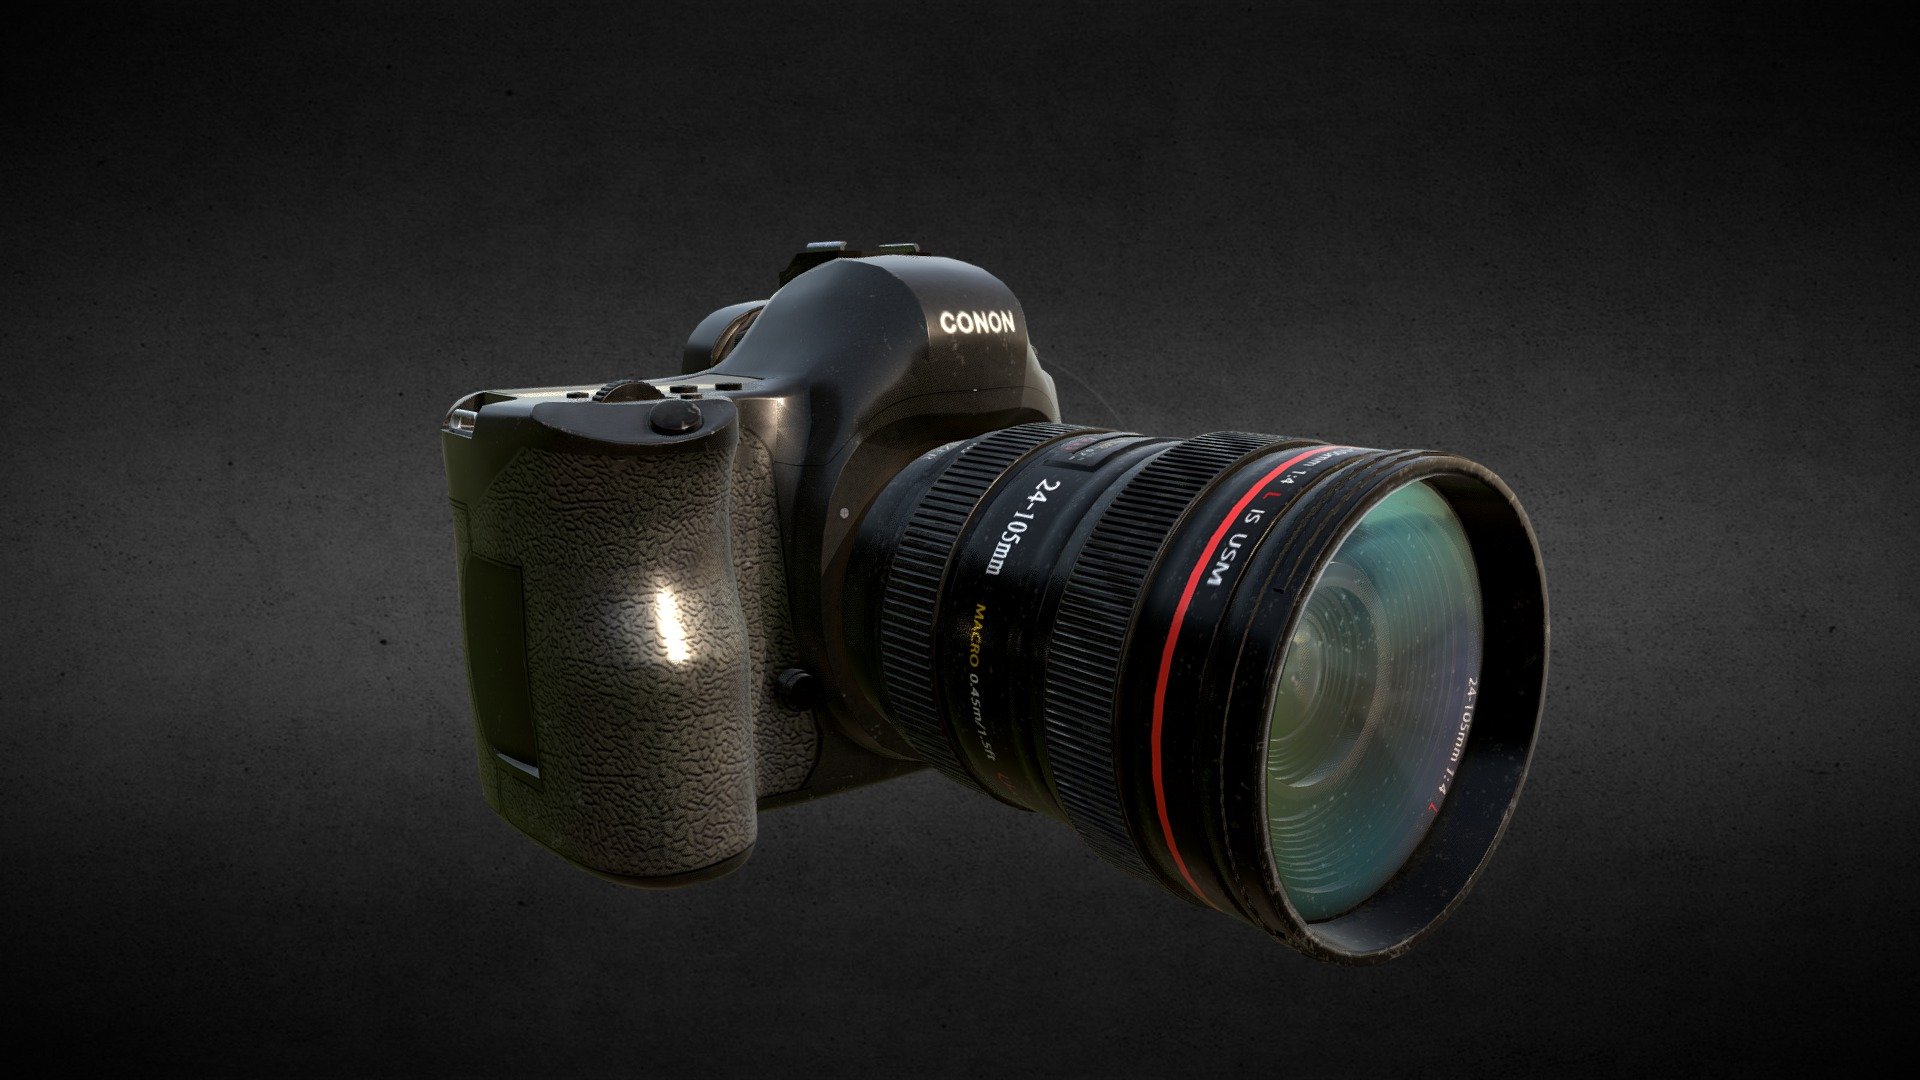 This is the model of camera styled after Canon 5D Mark III.

The model has a clean topology and a premium look to enhance detail and add realism to any scene or project. It is low-poly and suitable for use in games.

The model was created in Maya 2014 and is also available in max, fbx and obj formats for importing into any software or game engine.

UVs are fully unwrapped and non overlapping. The textures have been created inside Substance Painter and support PBR rendering. There are five types of textures - Diffuse, Occlusion, Normal, Metallic and Roughness.

File Details

Clean topology, optimized geometry

Clean heirarchy with logical naming and easy to use grouping

Unit is set to centimeter (cm). Real-world scale.

UVs unwrapped, non-overlapping

PBR support

Formats available: .ma, .mb, .obj, .fbx, .max

Tris count:  89619

Texture format: 2048x2048 and 4096x4096 PNG

Texture types: Diffuse, Normal, Occlusion, Metallic, Roughness

Hope you like the model!


Digital Agents Interactive Pvt Ltd
 - DSLR Camera - 3D model by Digital Agents Interactive Pvt Ltd (@DigitalAgents) 3d model